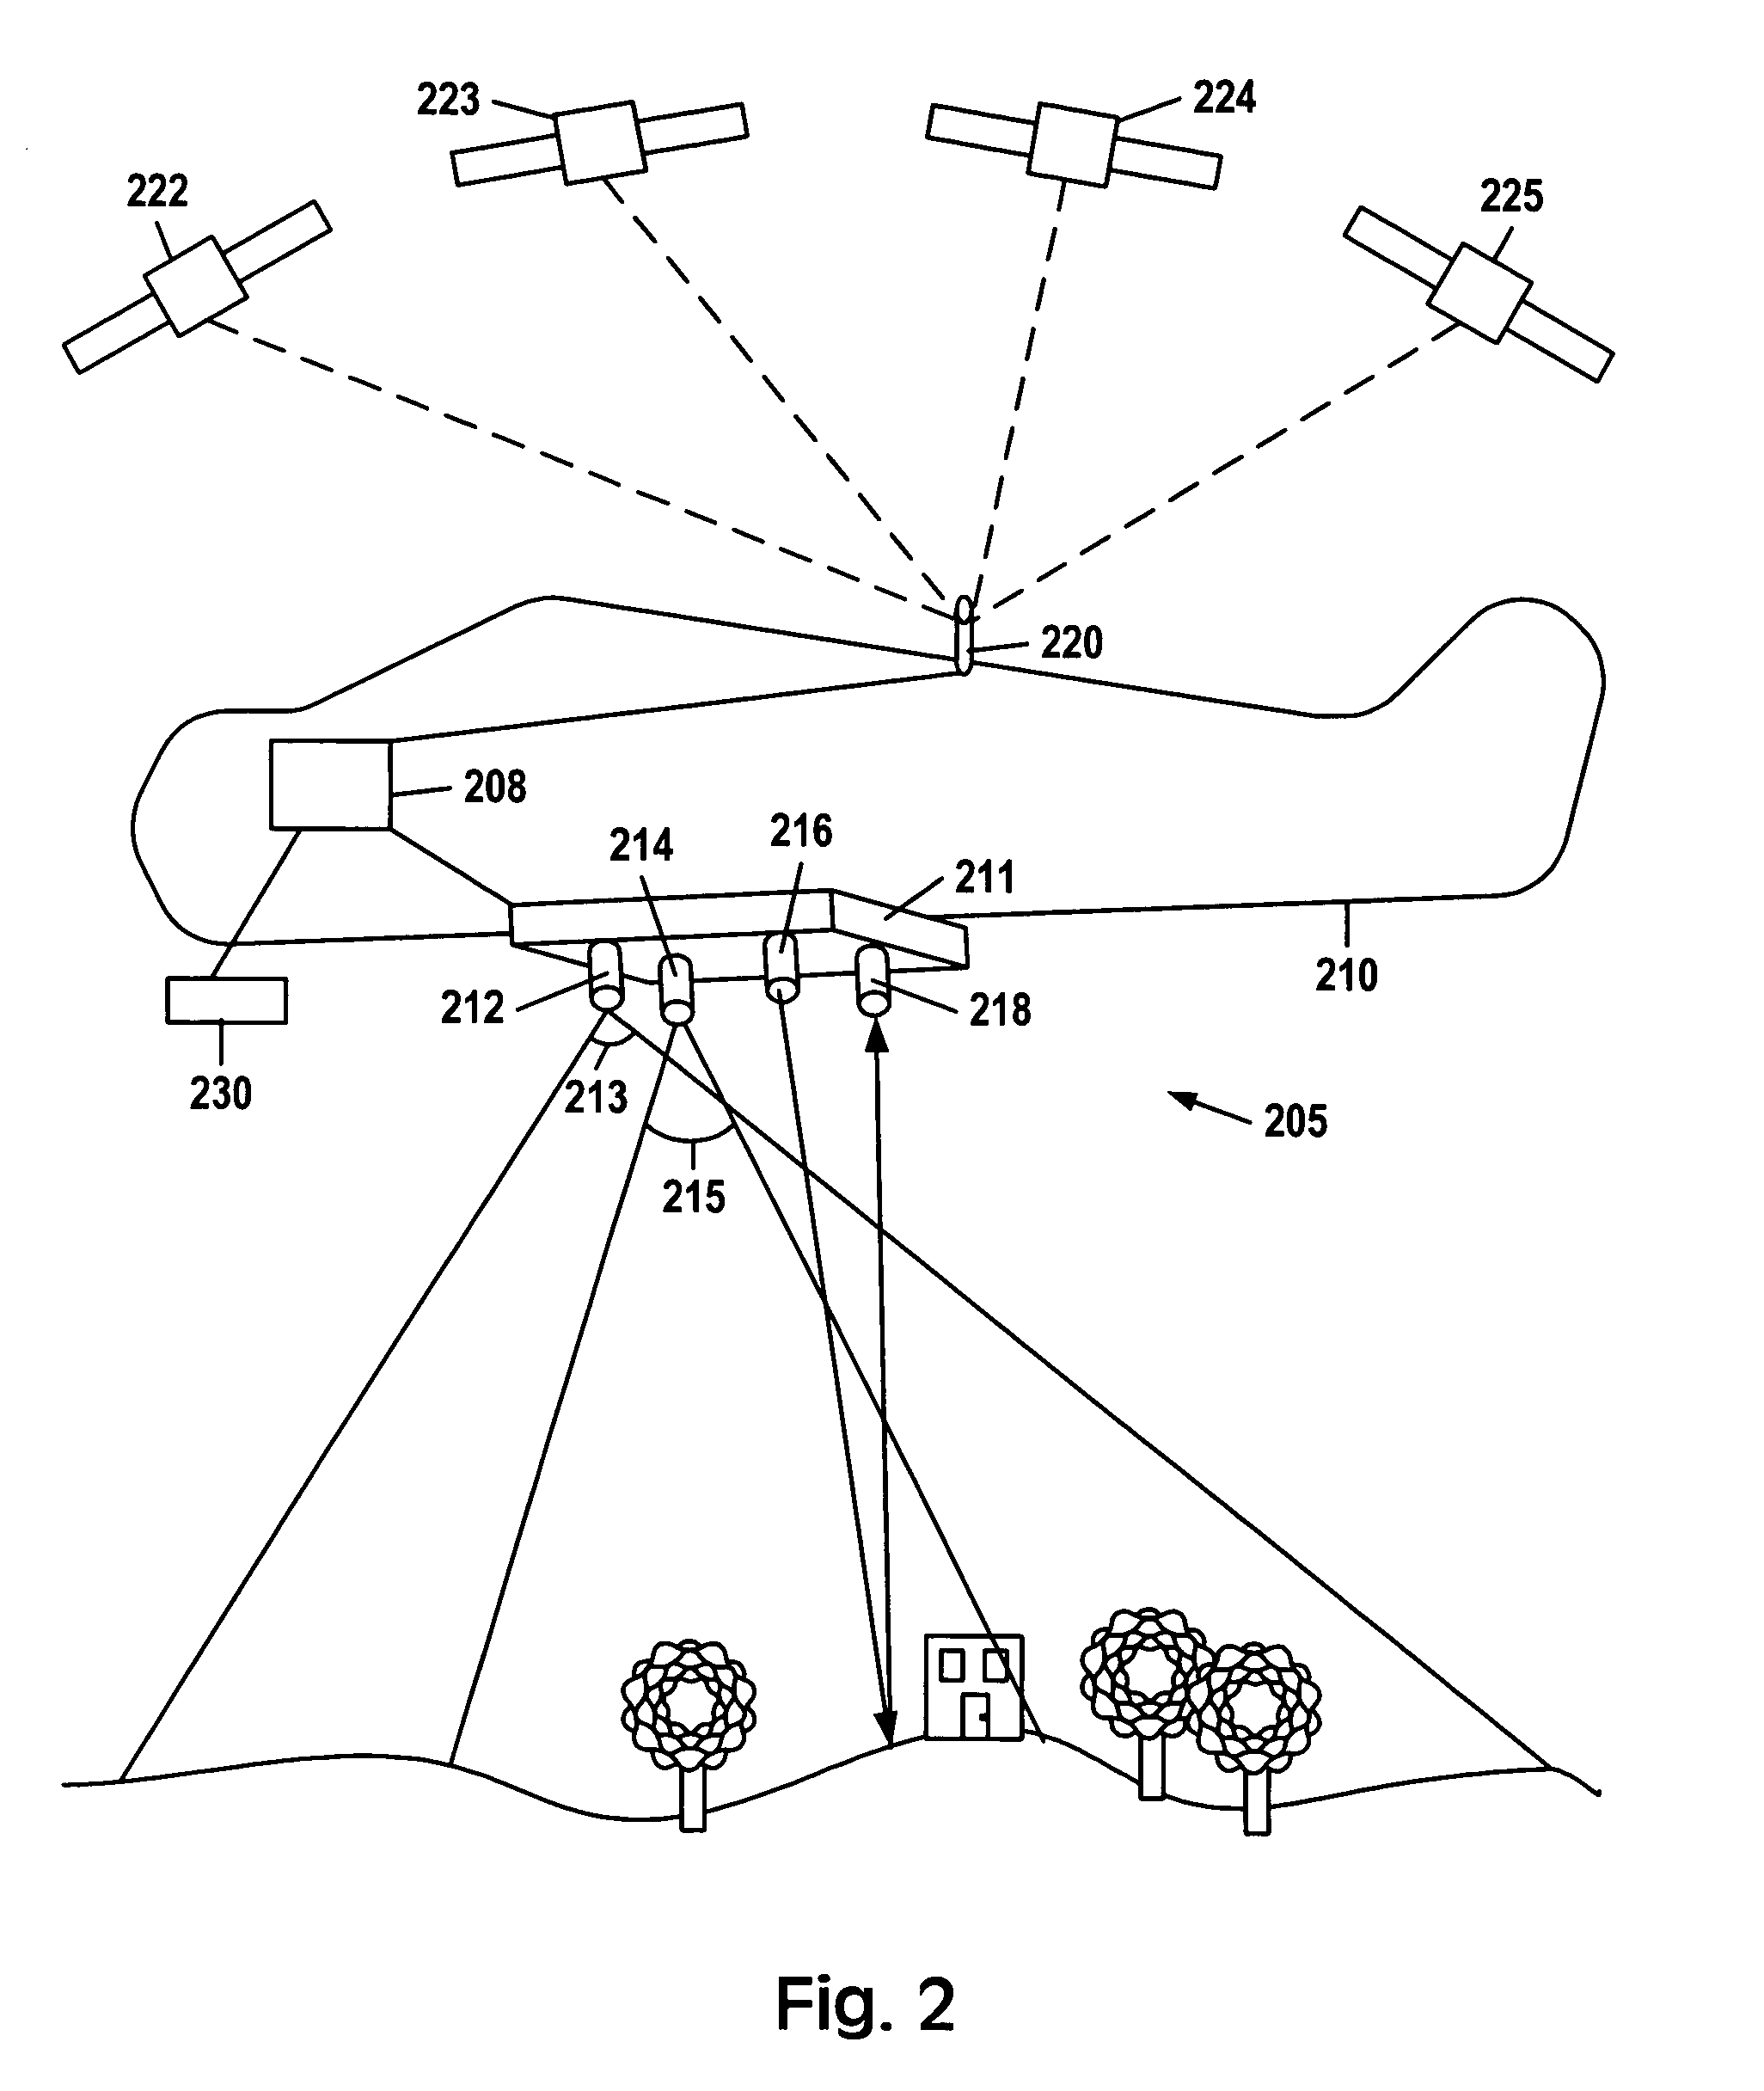 Multispectral data acquisition system and method